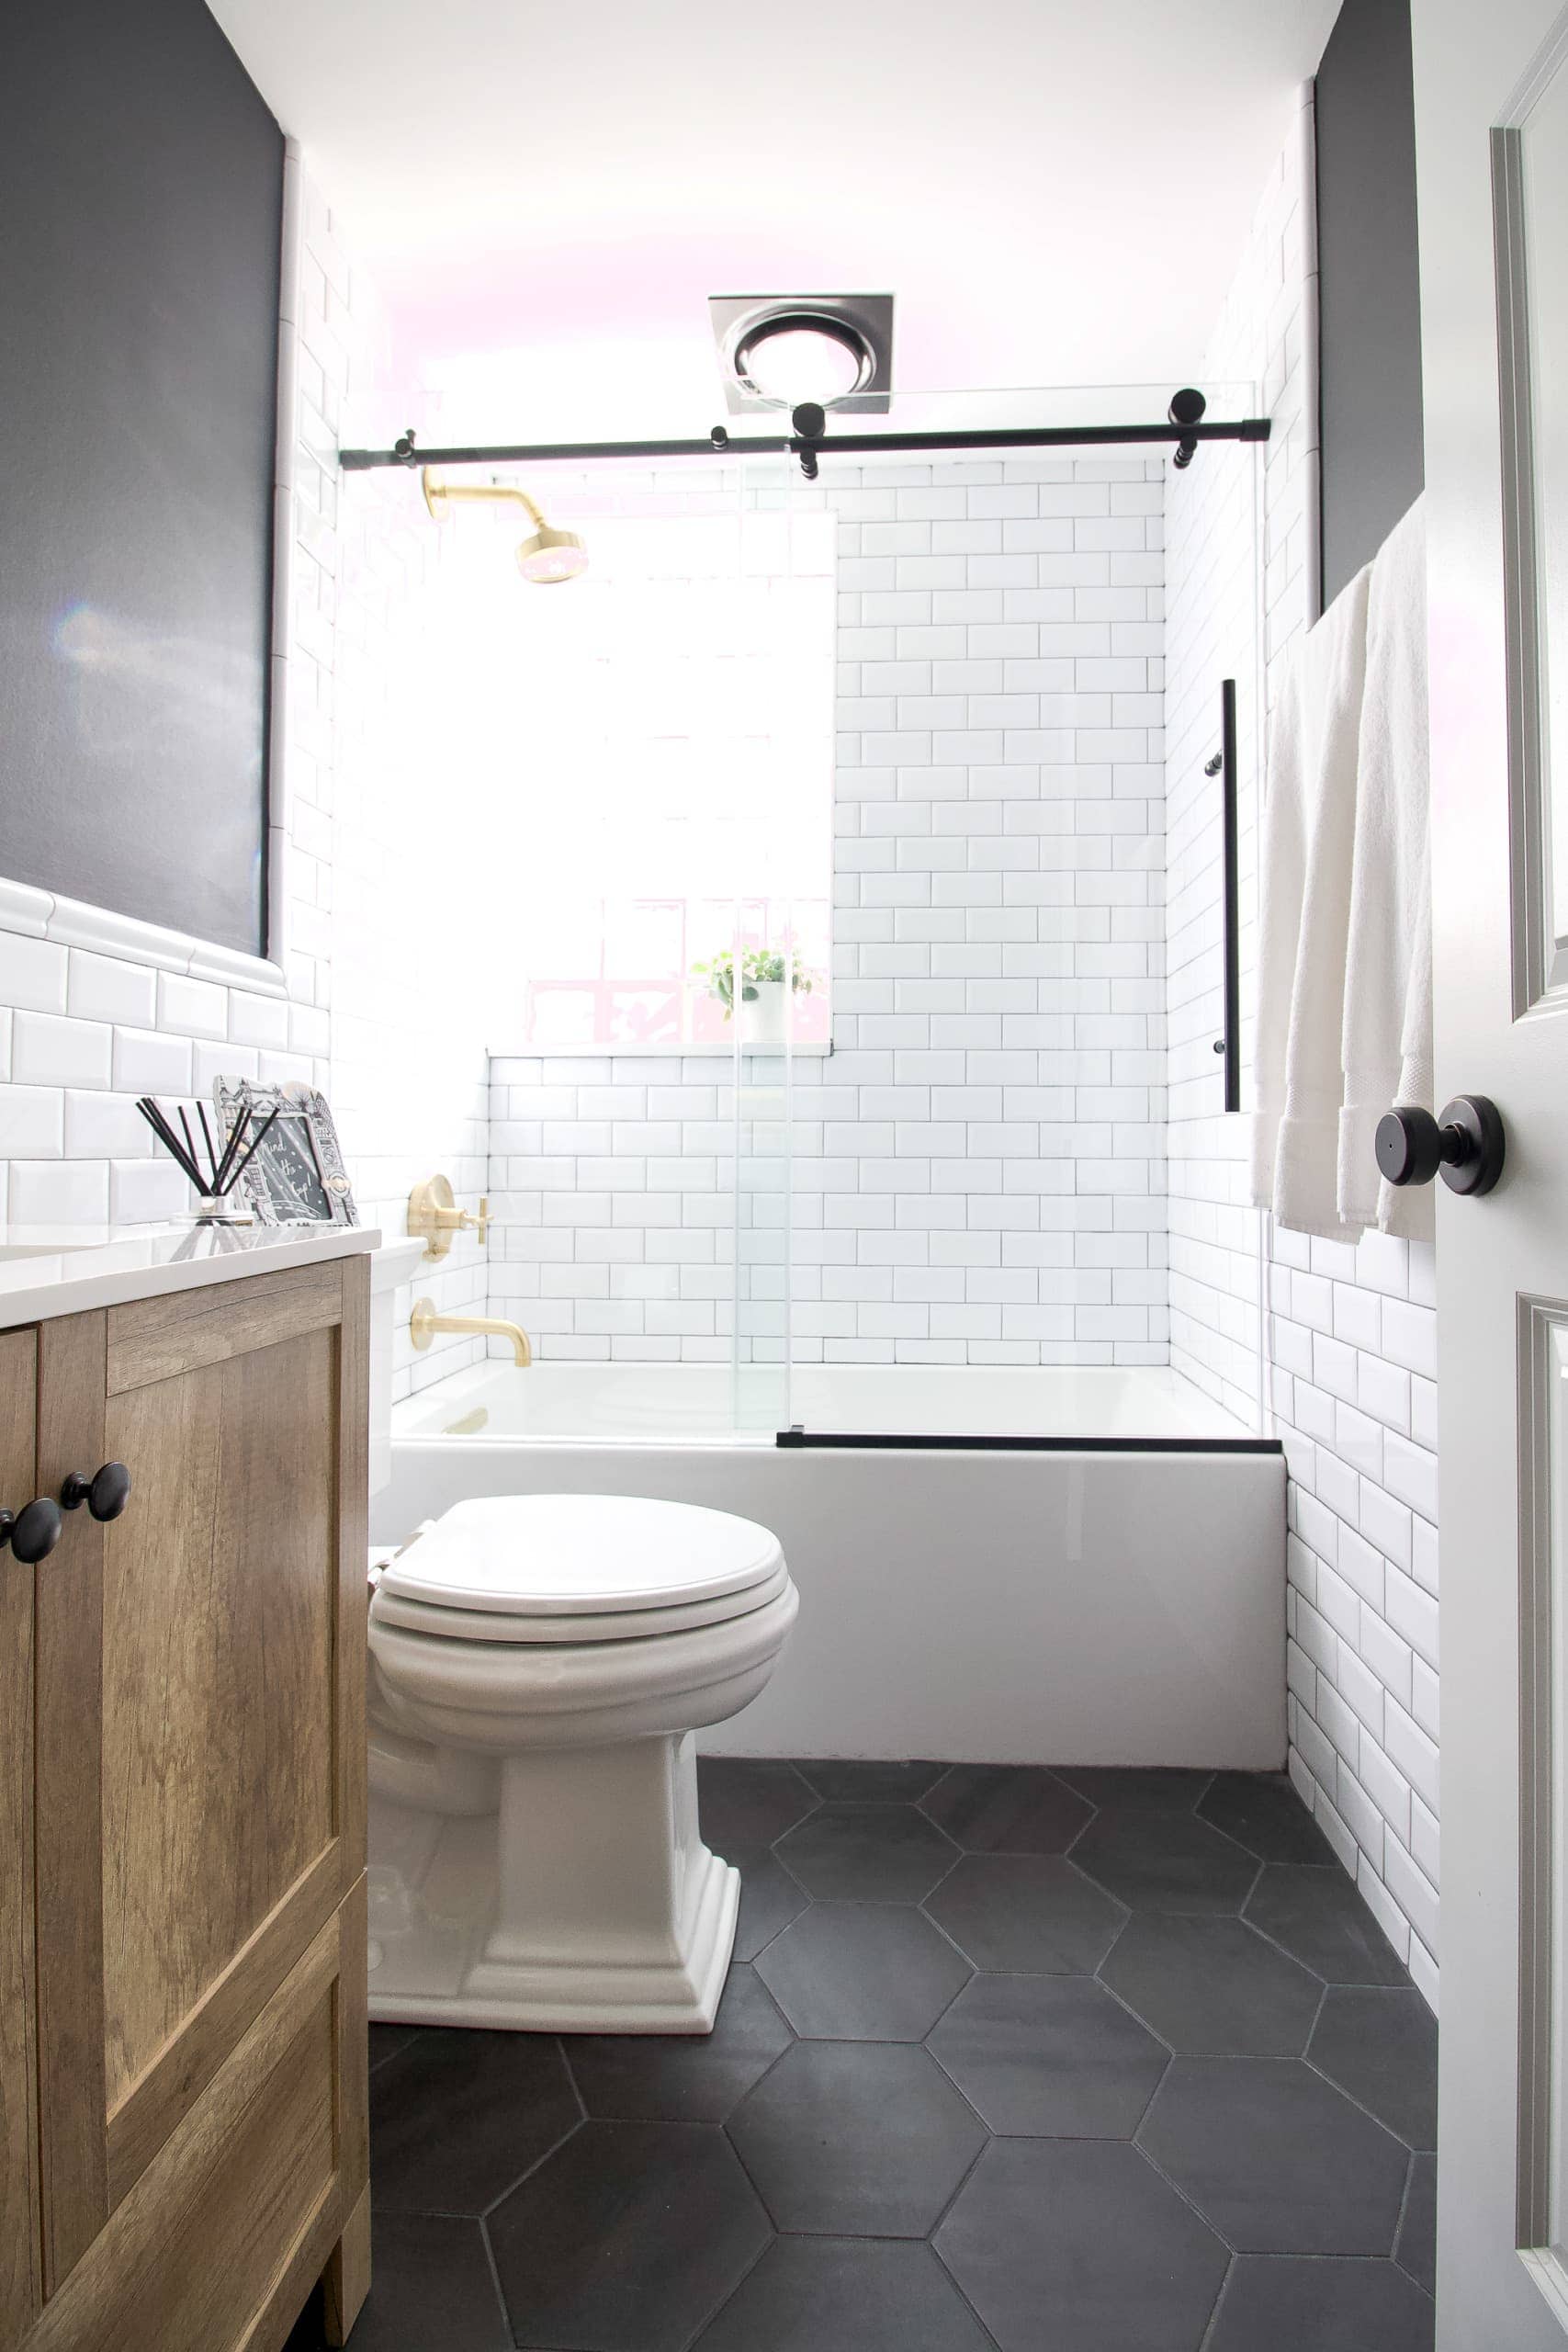 What Are Your Main Bathroom Must-Haves?